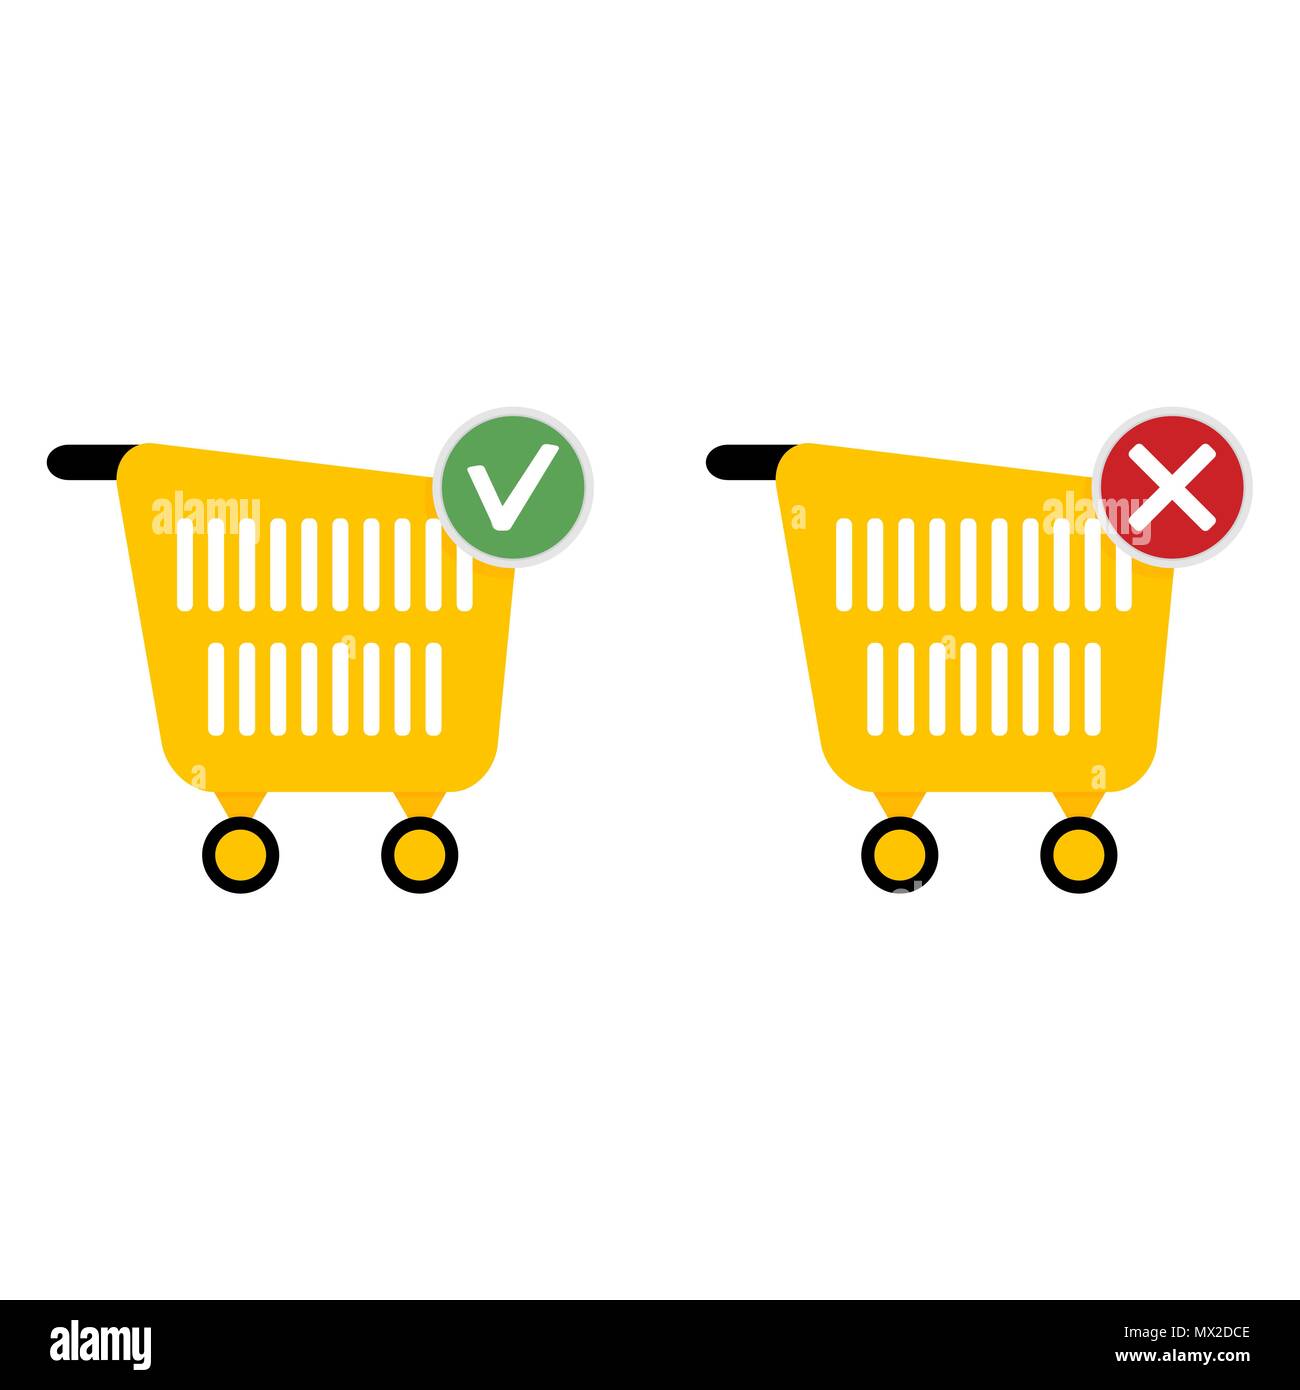 Add or cancel purchase. Web icons for store. Vector basket shop, ecommerce cart for purchase illustration Stock Vector